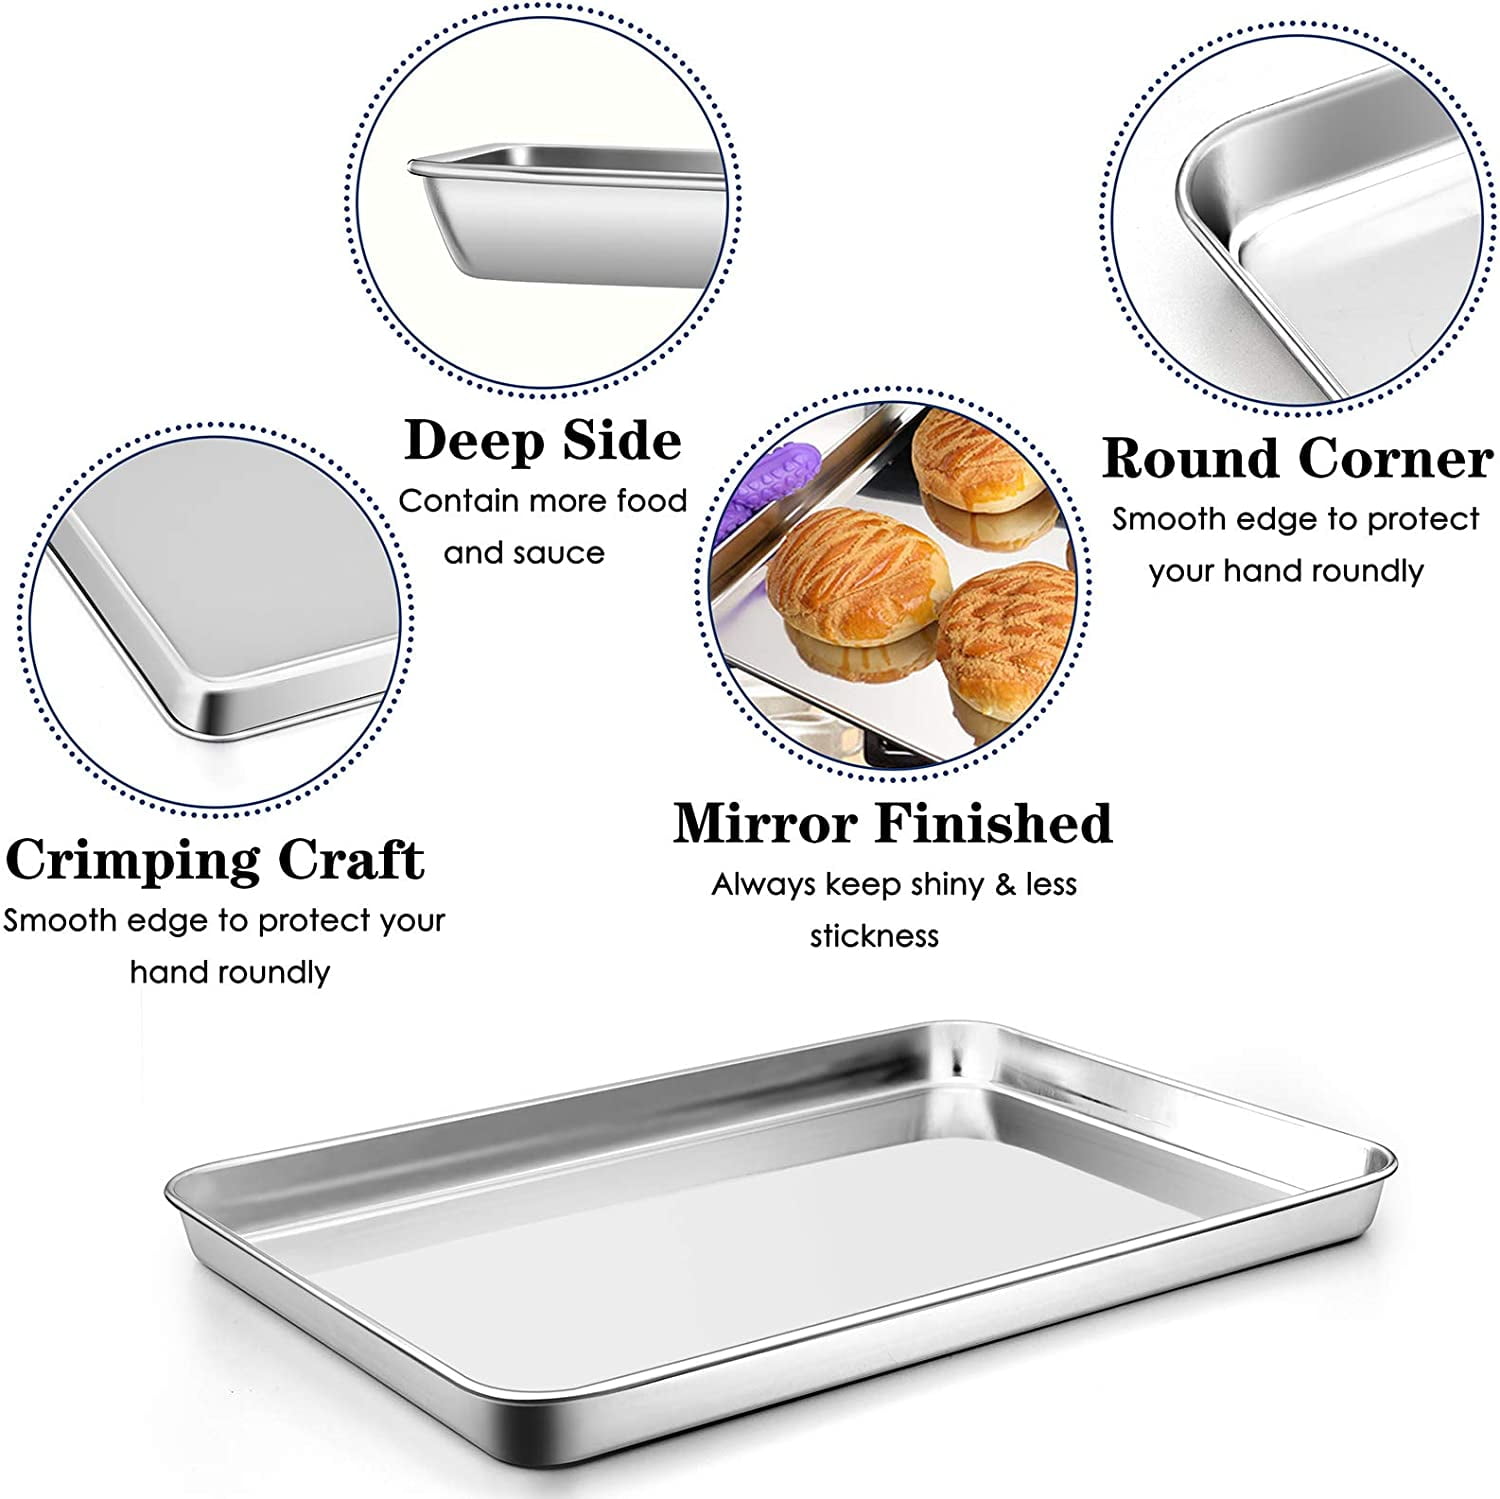 14x17-in COOKIE SHEET 304 Surgical Stainless Steel Professional